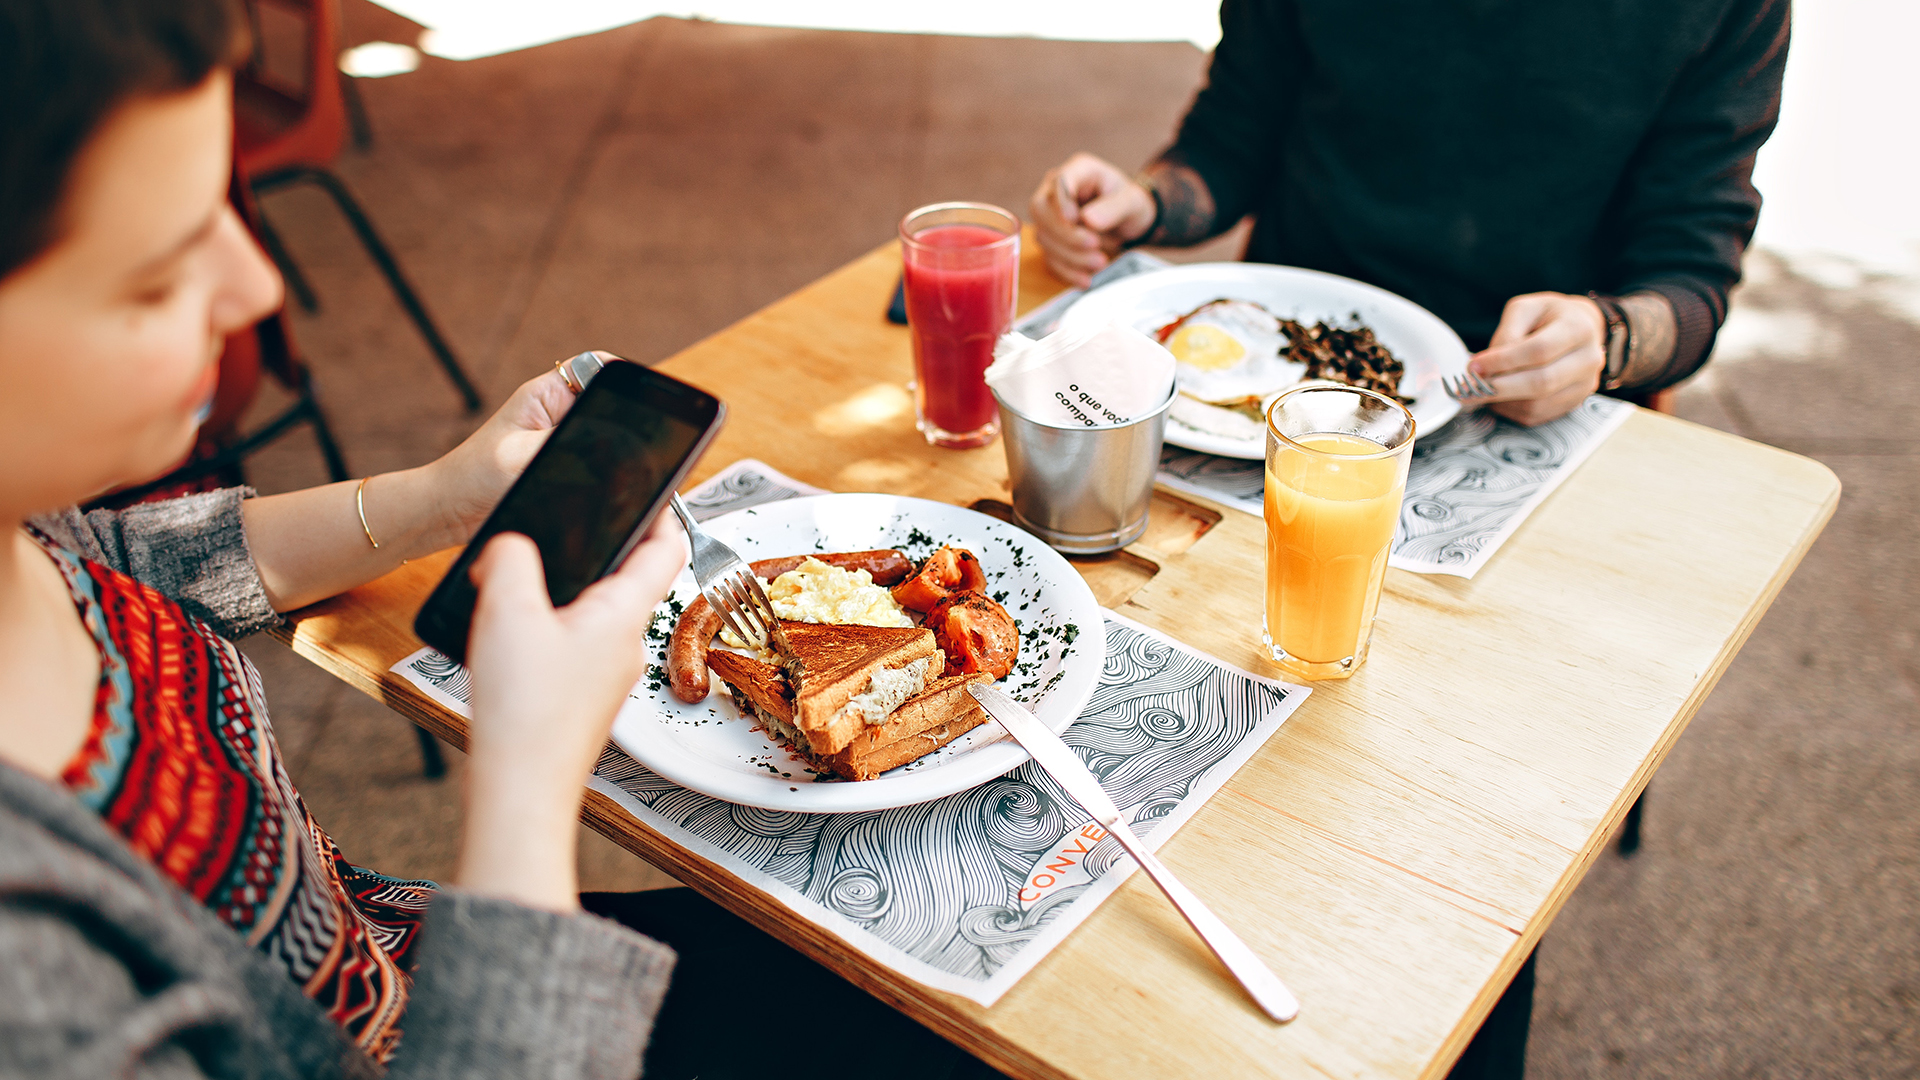 An image of two people dining out with one using Google Maps on their smartphone to photograph a popular dish.